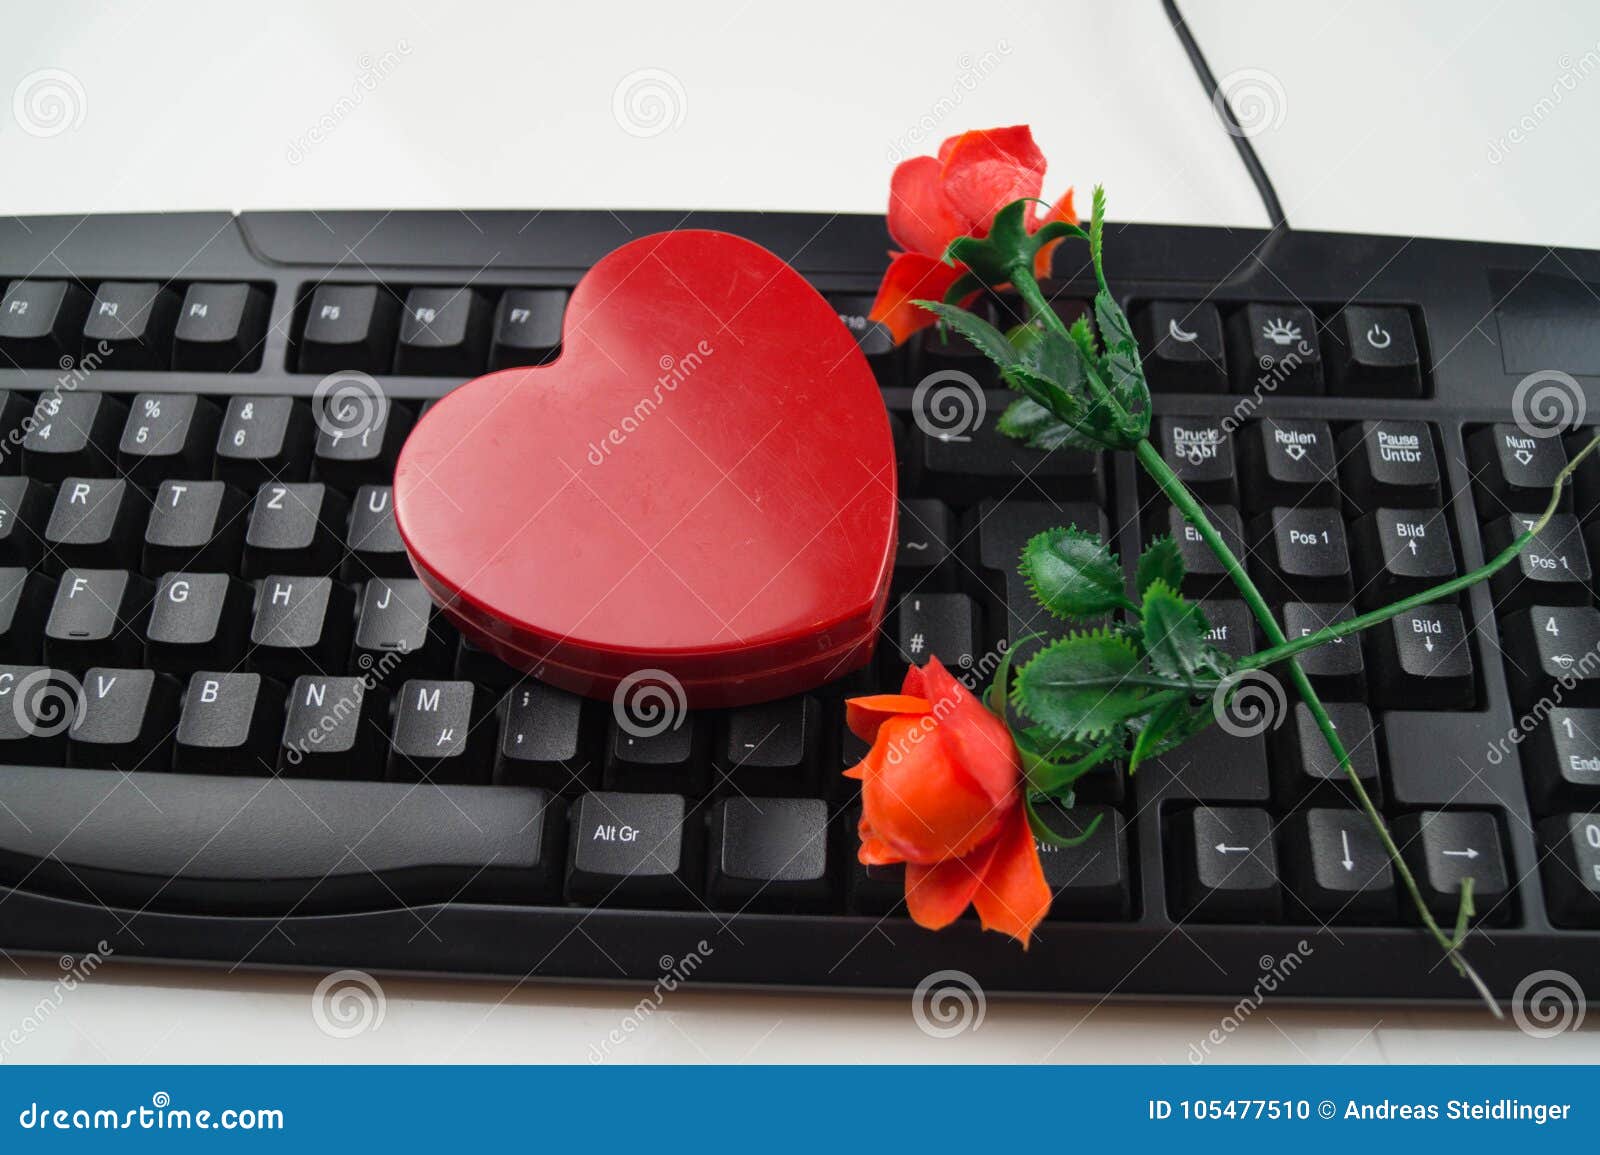 dating on- line pos)